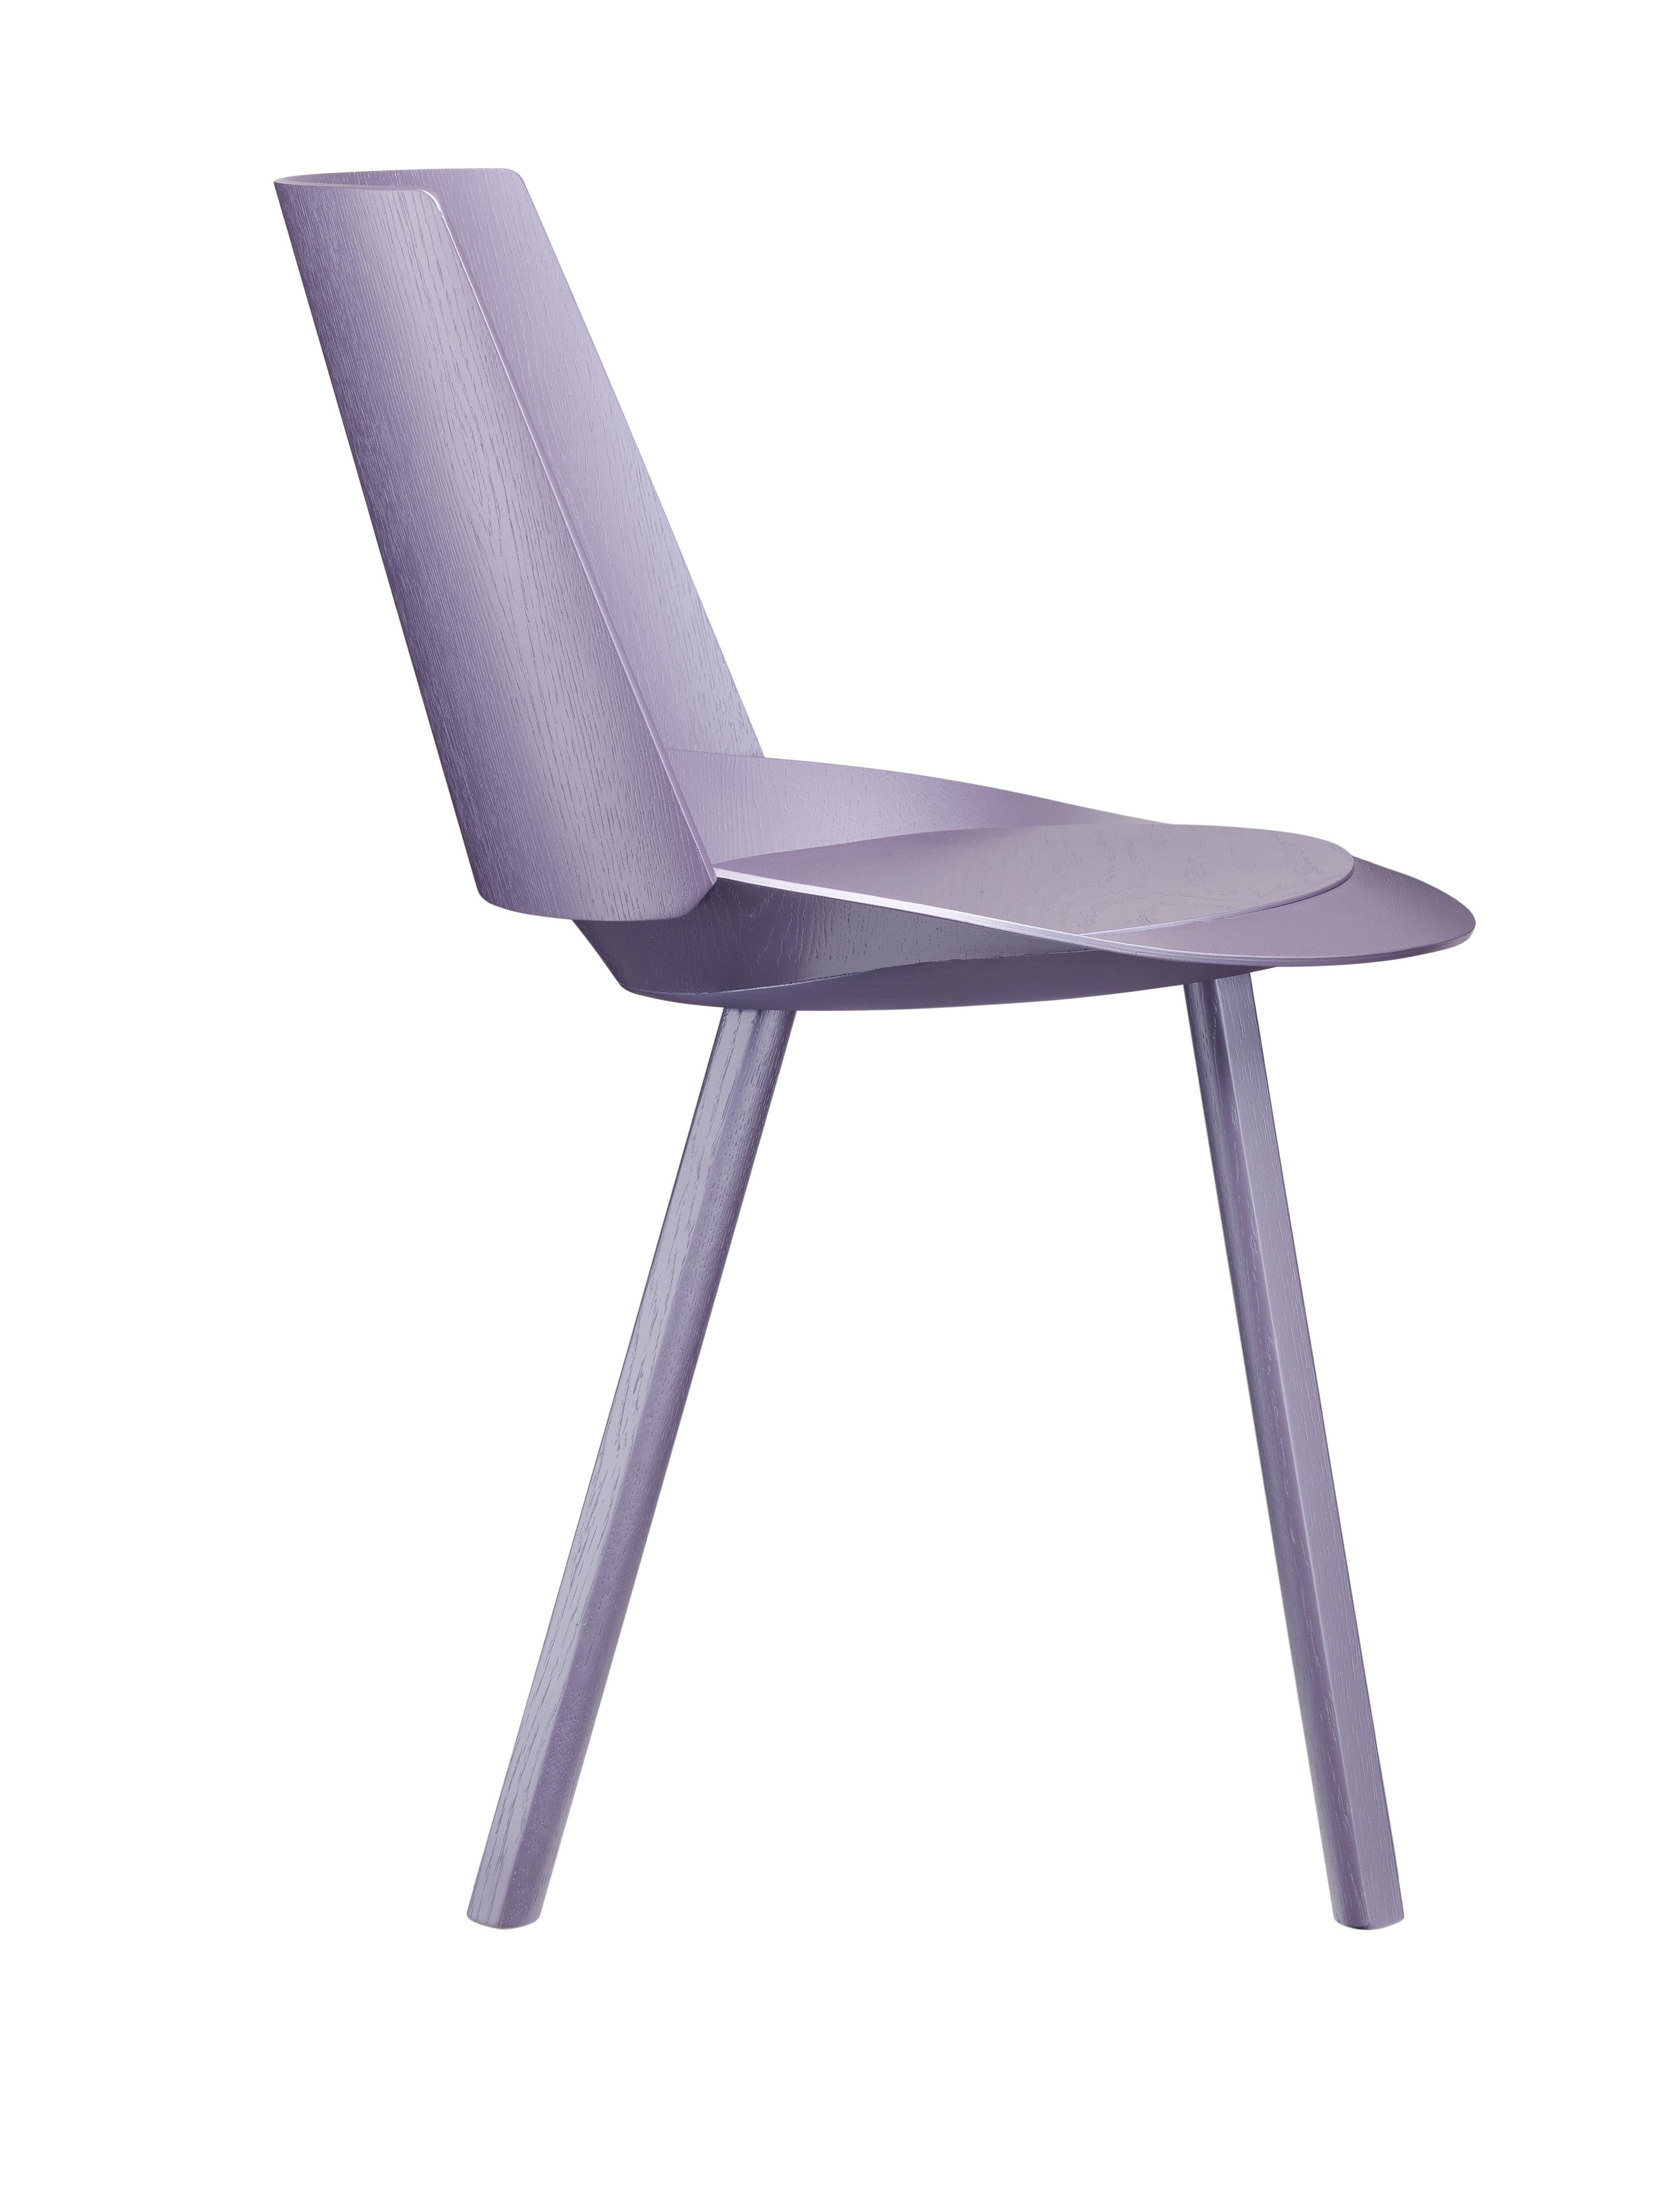 For Sale: Purple (Astro Violet Lacquer) e15 Houdini Side Chair by Stefan Diez 2